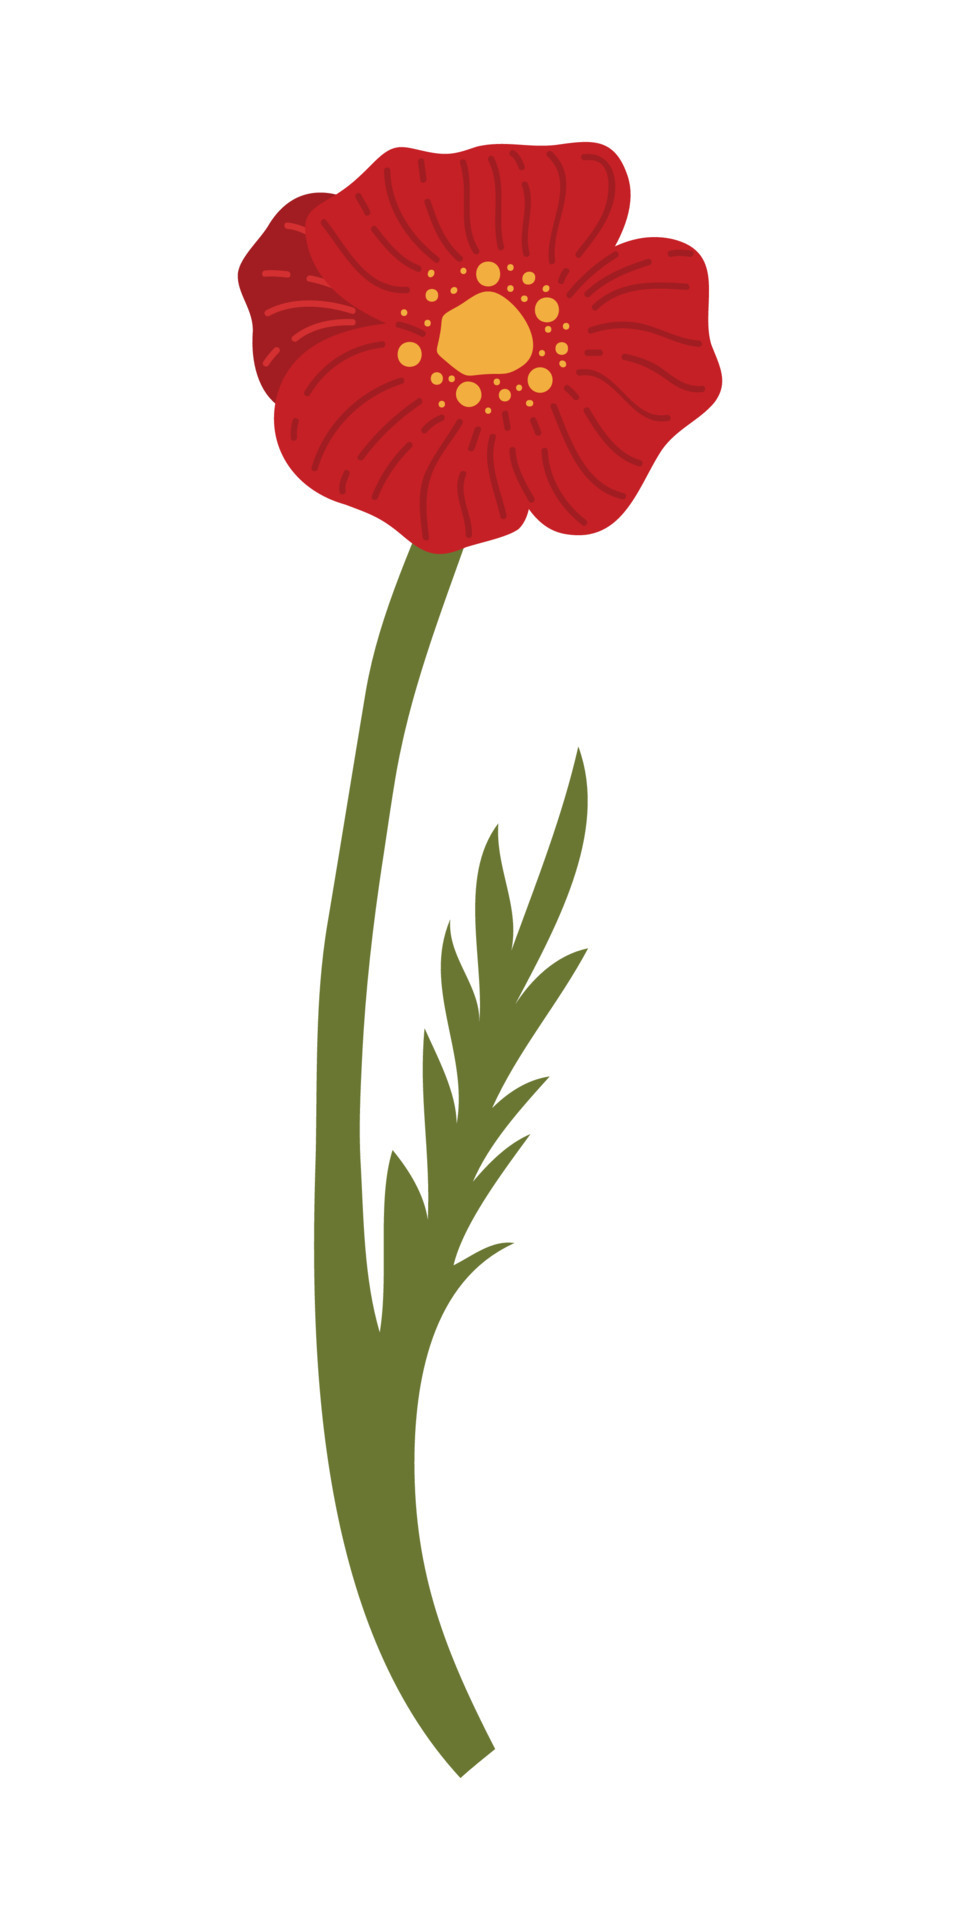 Poppy Flower Element Illustration. Vector red poppies isolated on a ...